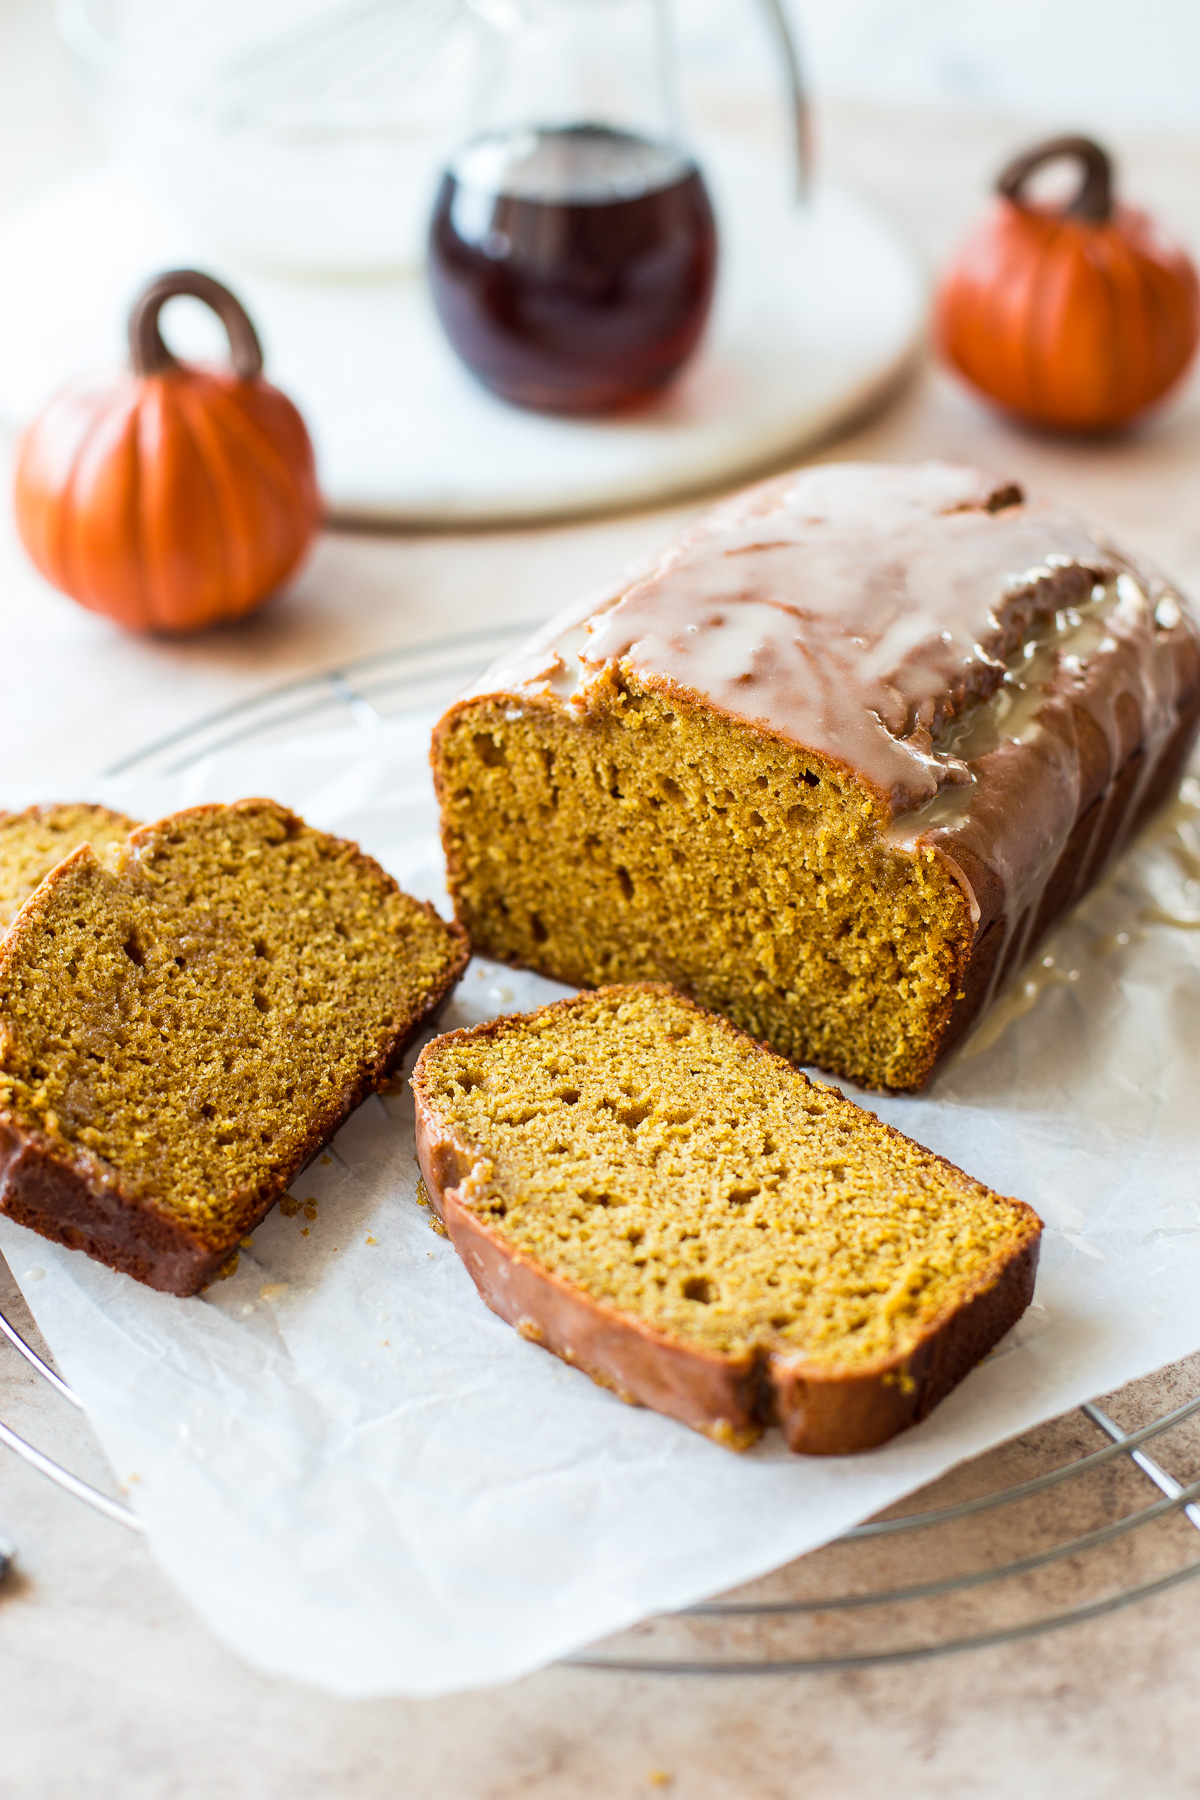 The Best Pumpkin Bread Recipe with Glazed Topping